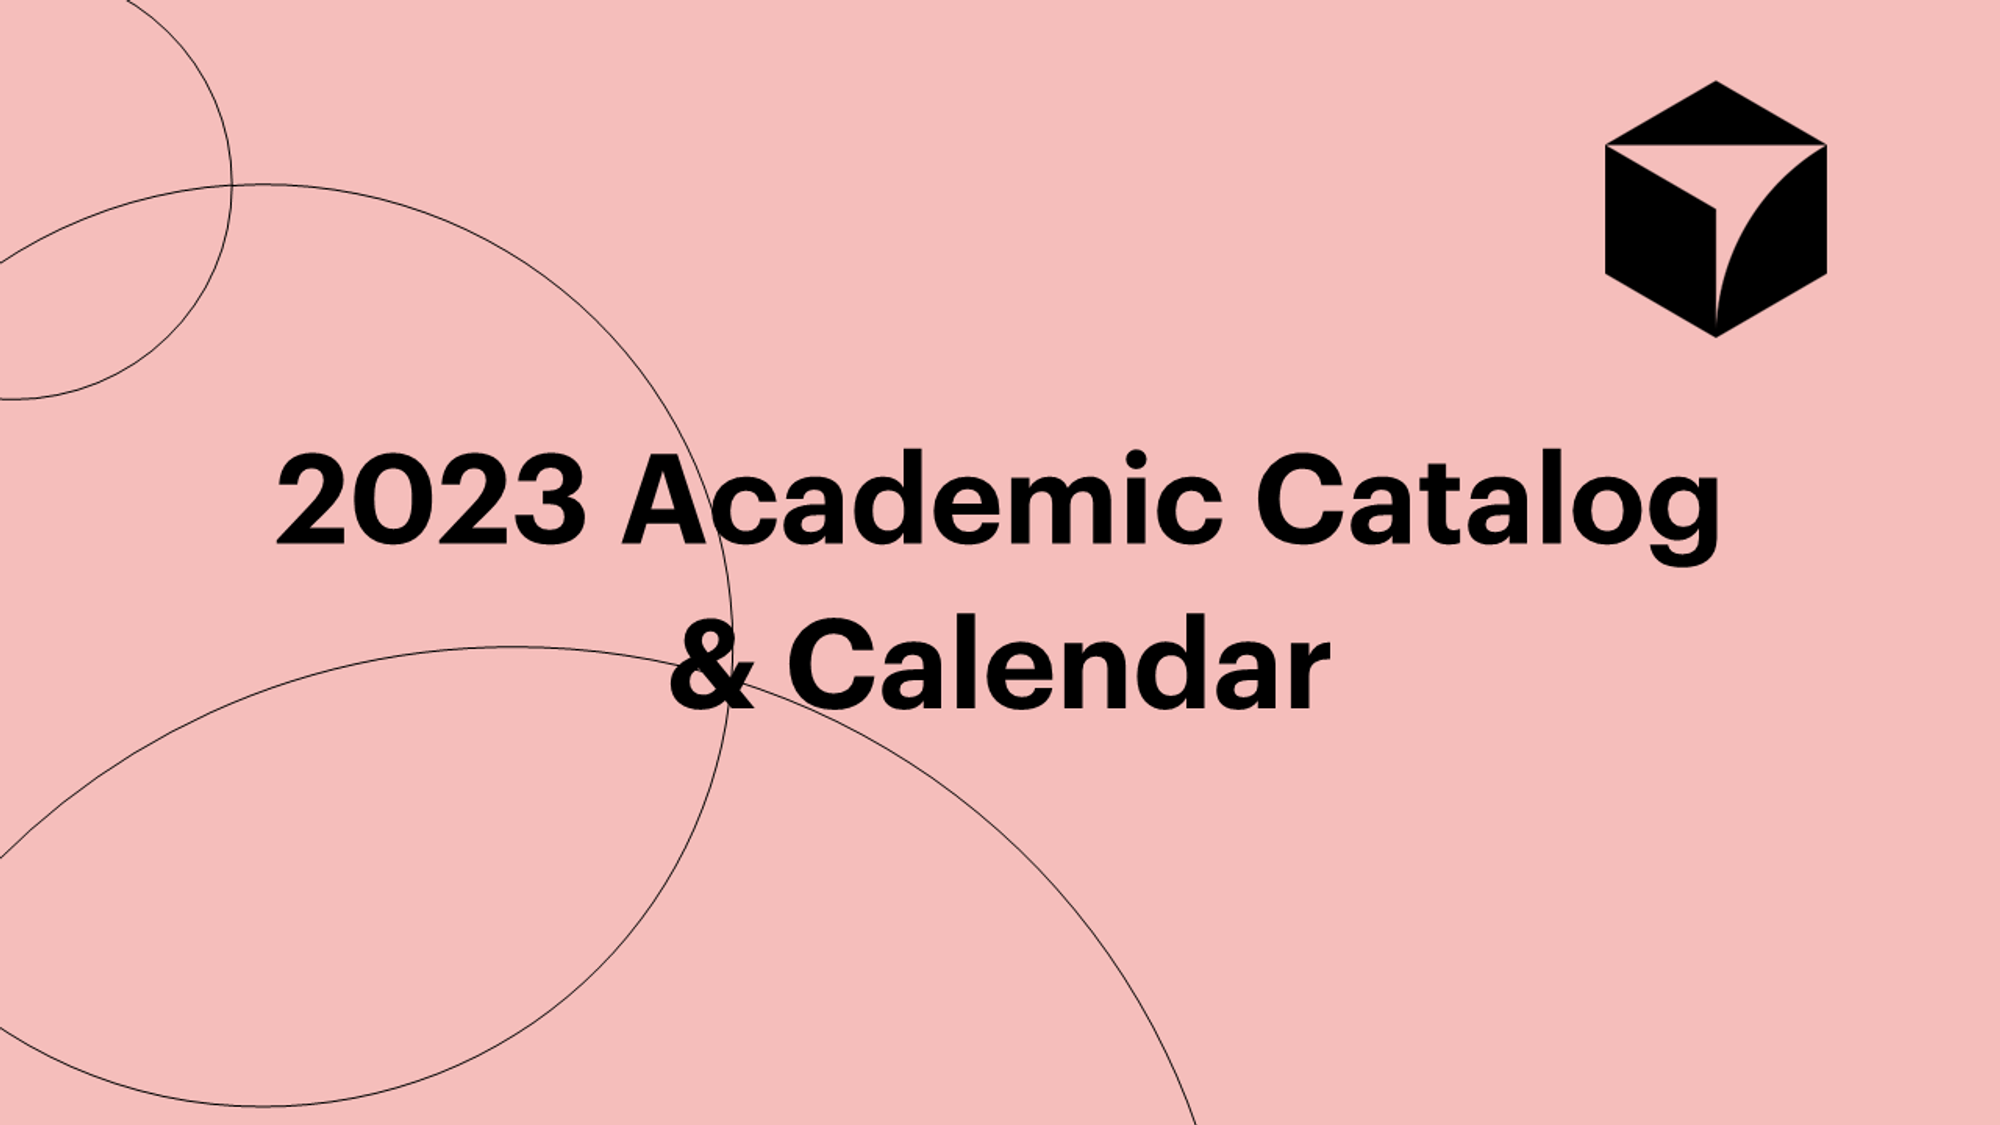 2023 Upcoming Courses